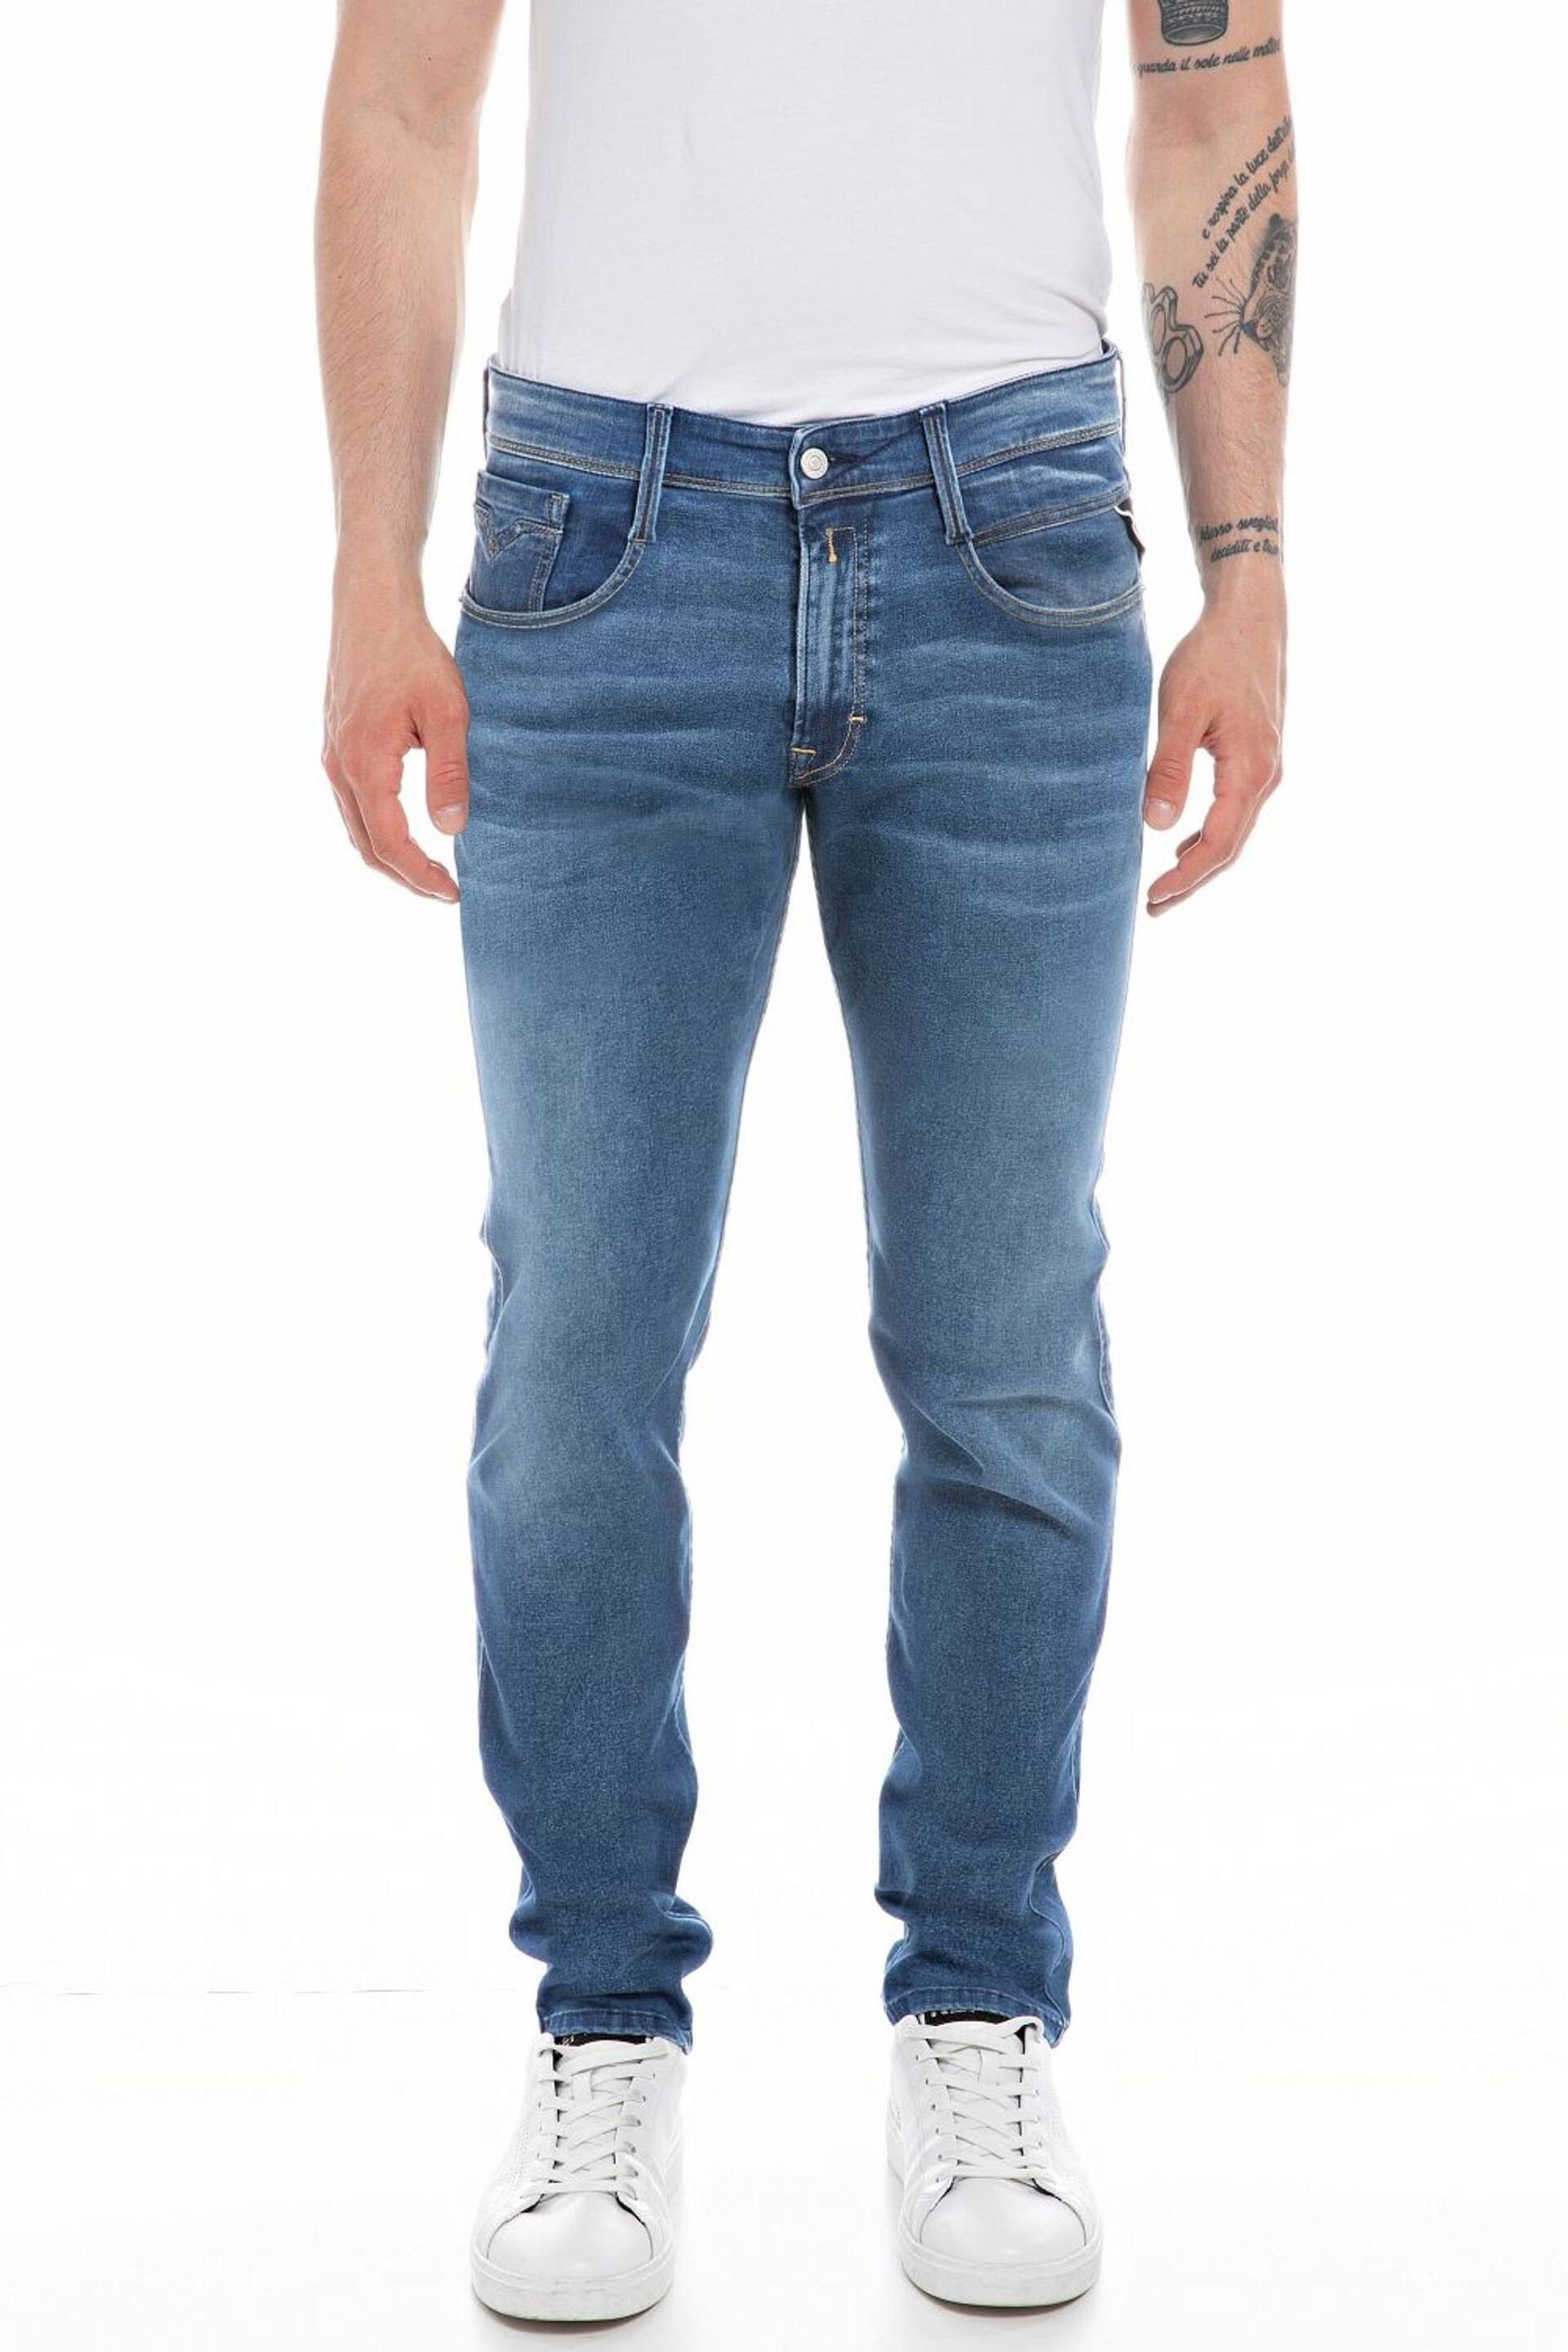 Replay Dark Blue Slim Fit Anbass Jeans - Image 1 of 2